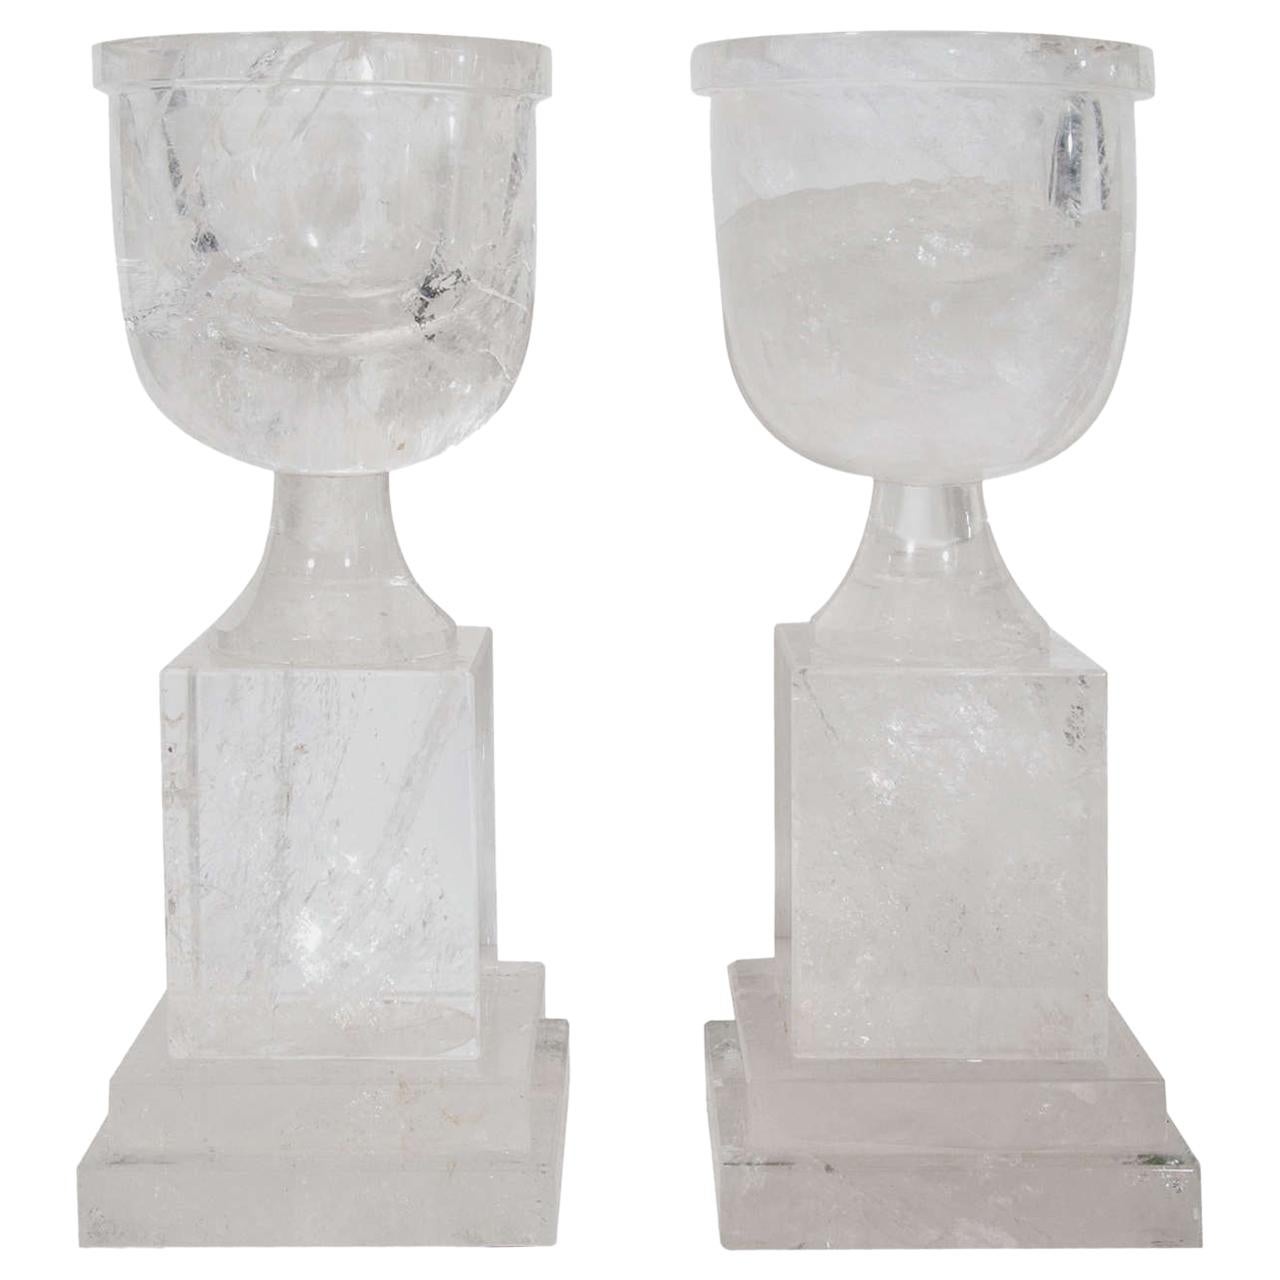 Pair of Superb and Unusual Art Deco Style Cut Rock Crystal Urns